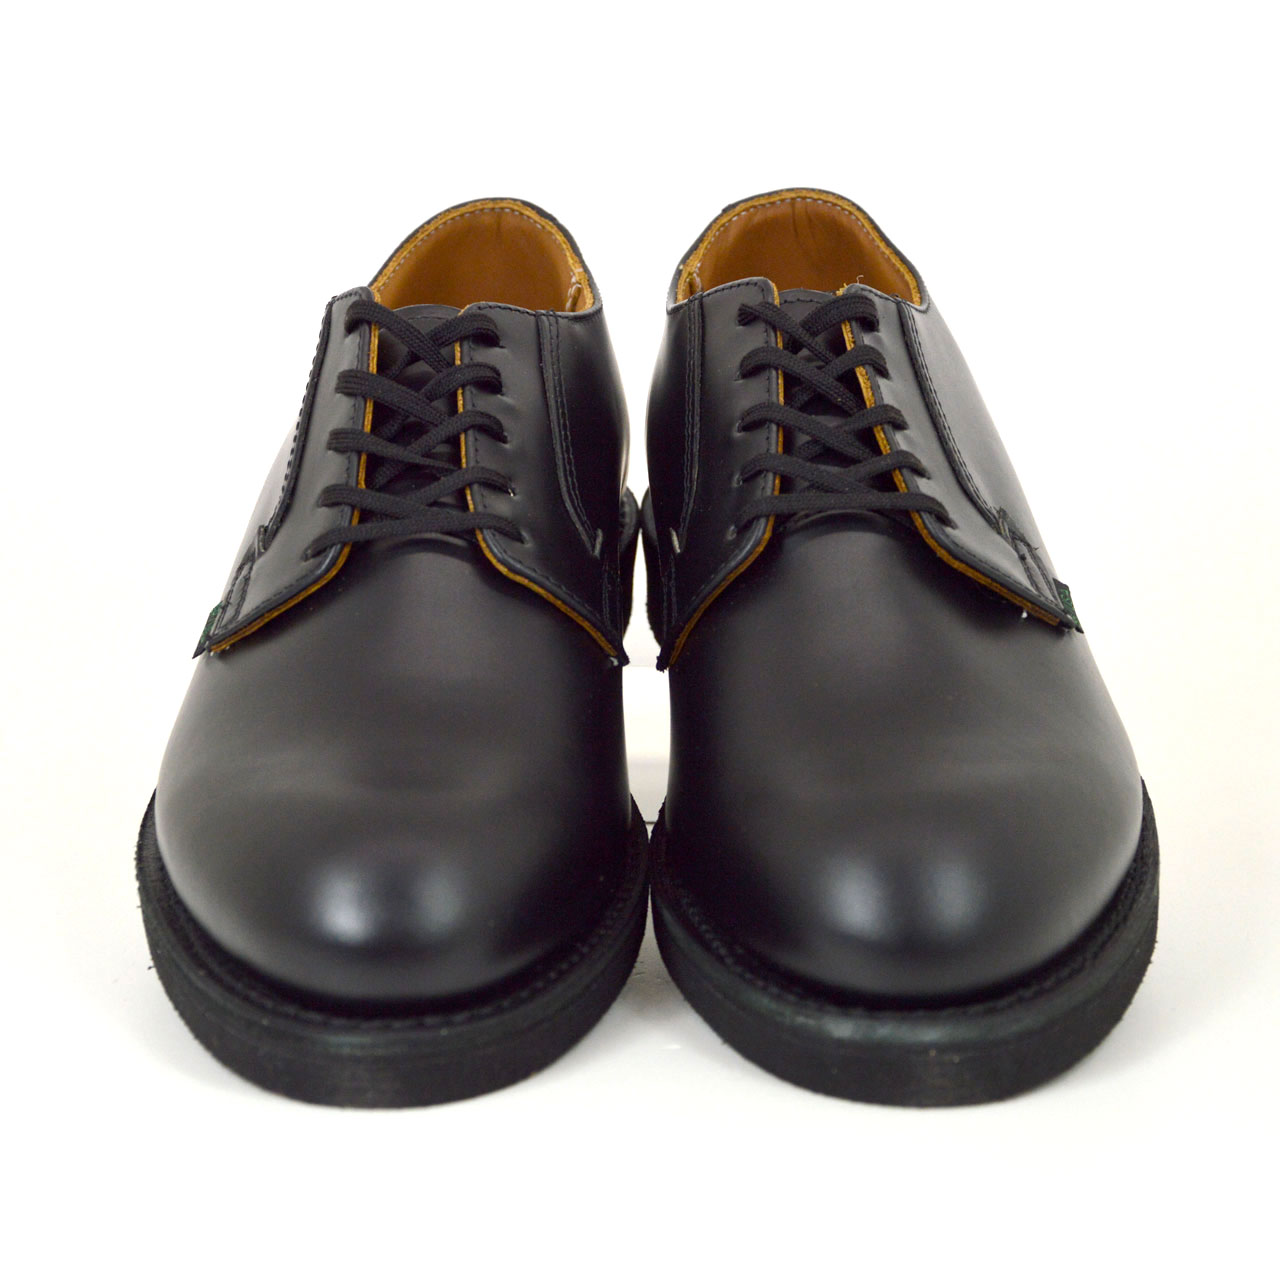 Red Wing - POSTMAN 101 - Black Chaparral 